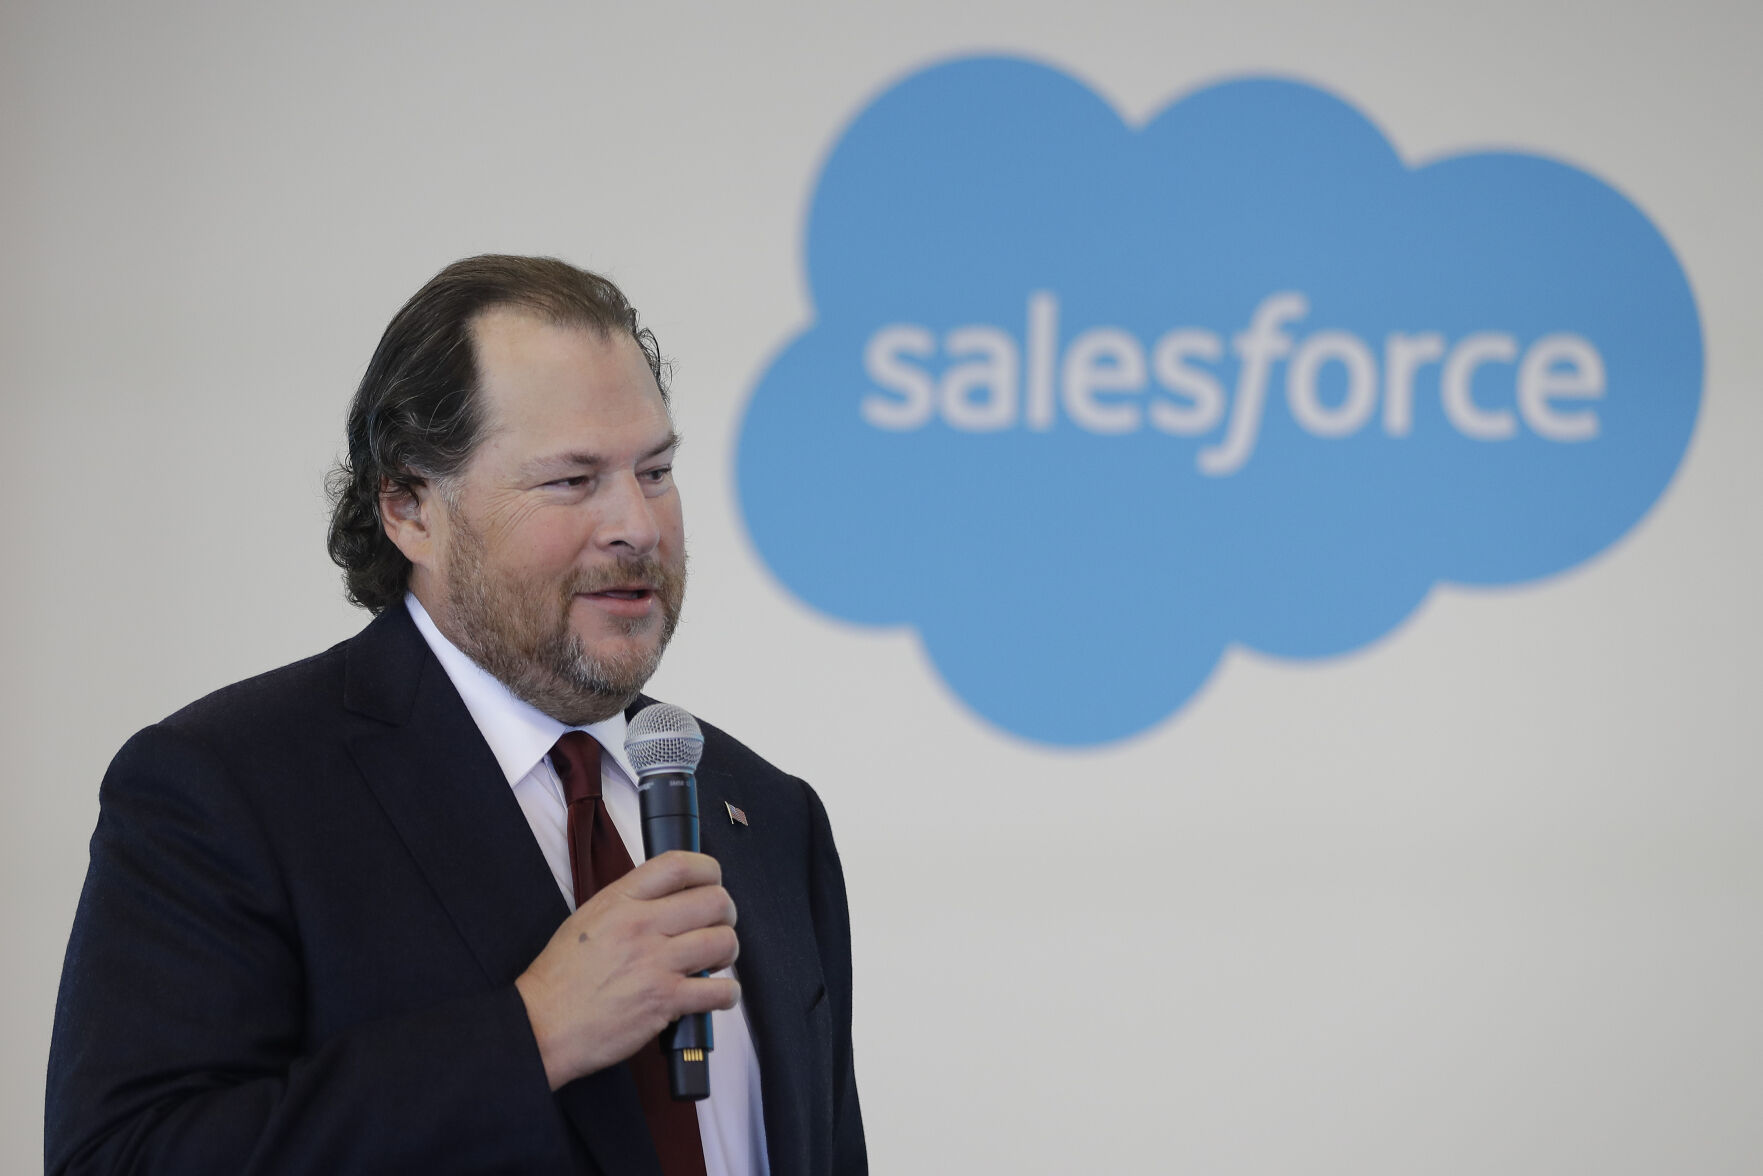 <p>FILE - In this Thursday, May 16, 2019, file photo, Salesforce chairman Marc Benioff speaks during a news conference, in Indianapolis. Salesforce is laying off about 10% of its workforce, more than 7,350 employees, the latest job cuts in the tech industry as corporations cut back on software and other spending. The San Francisco cloud computing software company will also be closing some offices, according to a regulatory filing Wednesday, Jan. 4, 2023. (AP Photo/Darron Cummings, File)</p>   PHOTO CREDIT: Darron Cummings 